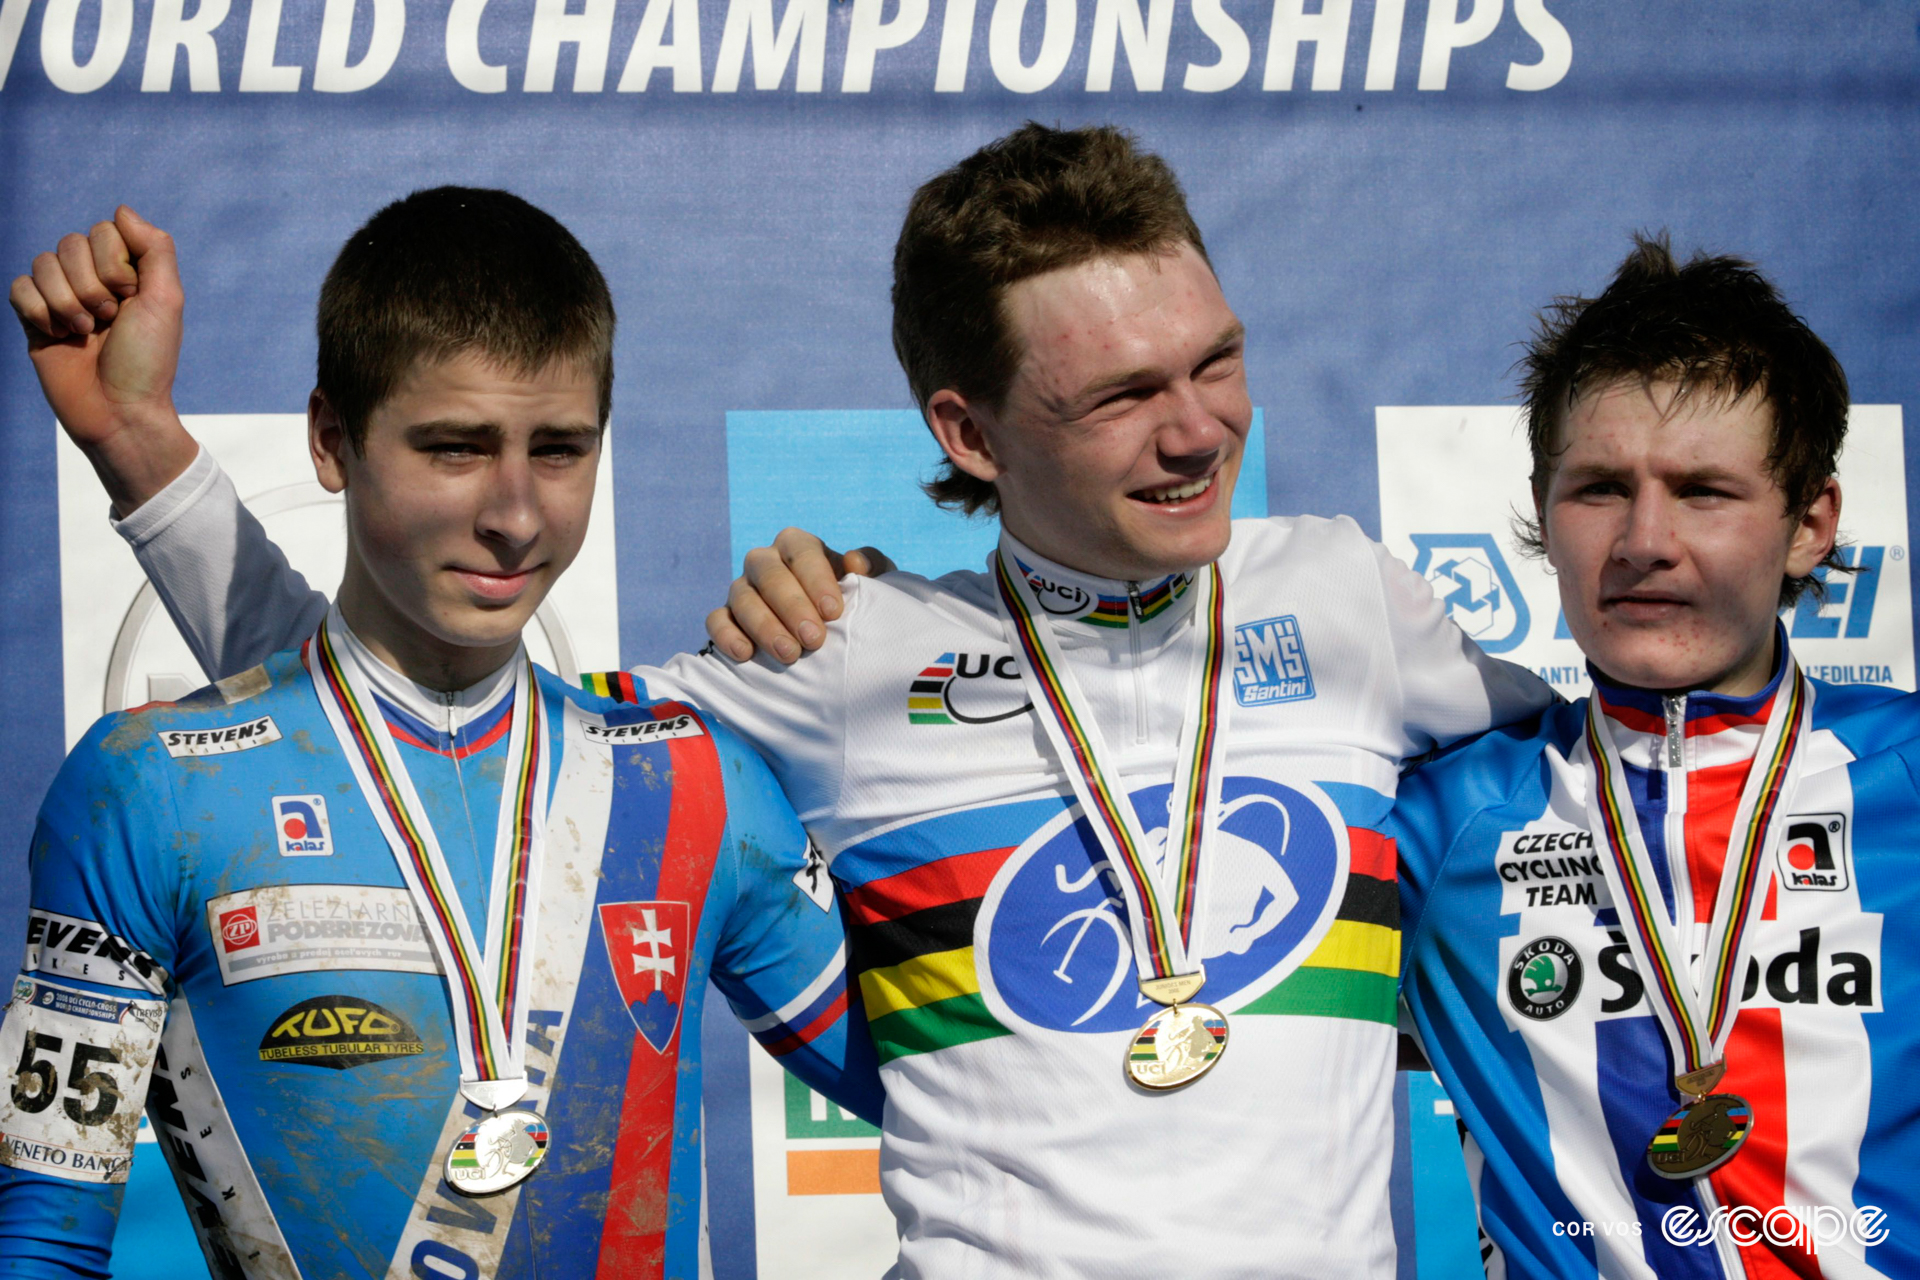 Peter Sagan stands on the podium at cyclocross Worlds, having won silver. Two cyclists stand to his left.